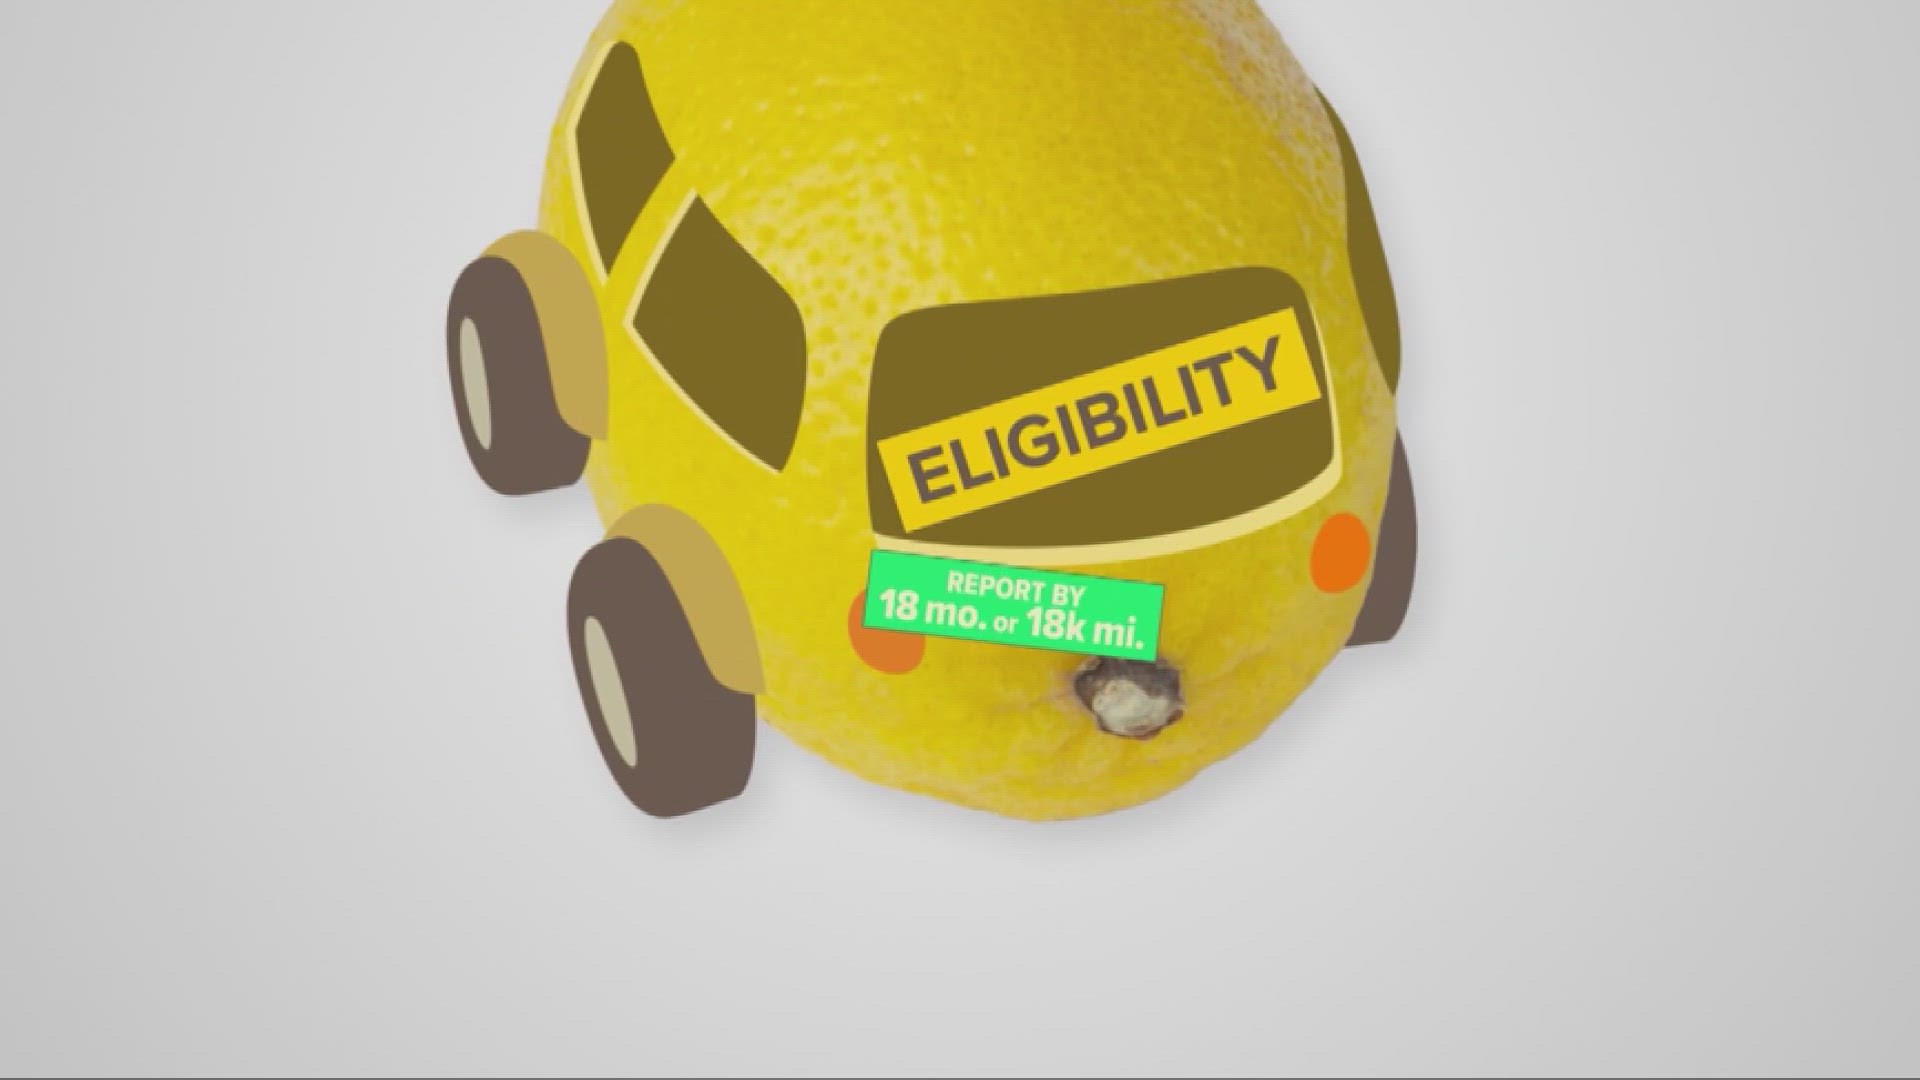 The Lemon Law is around to protect your pockets if your new car has issues.